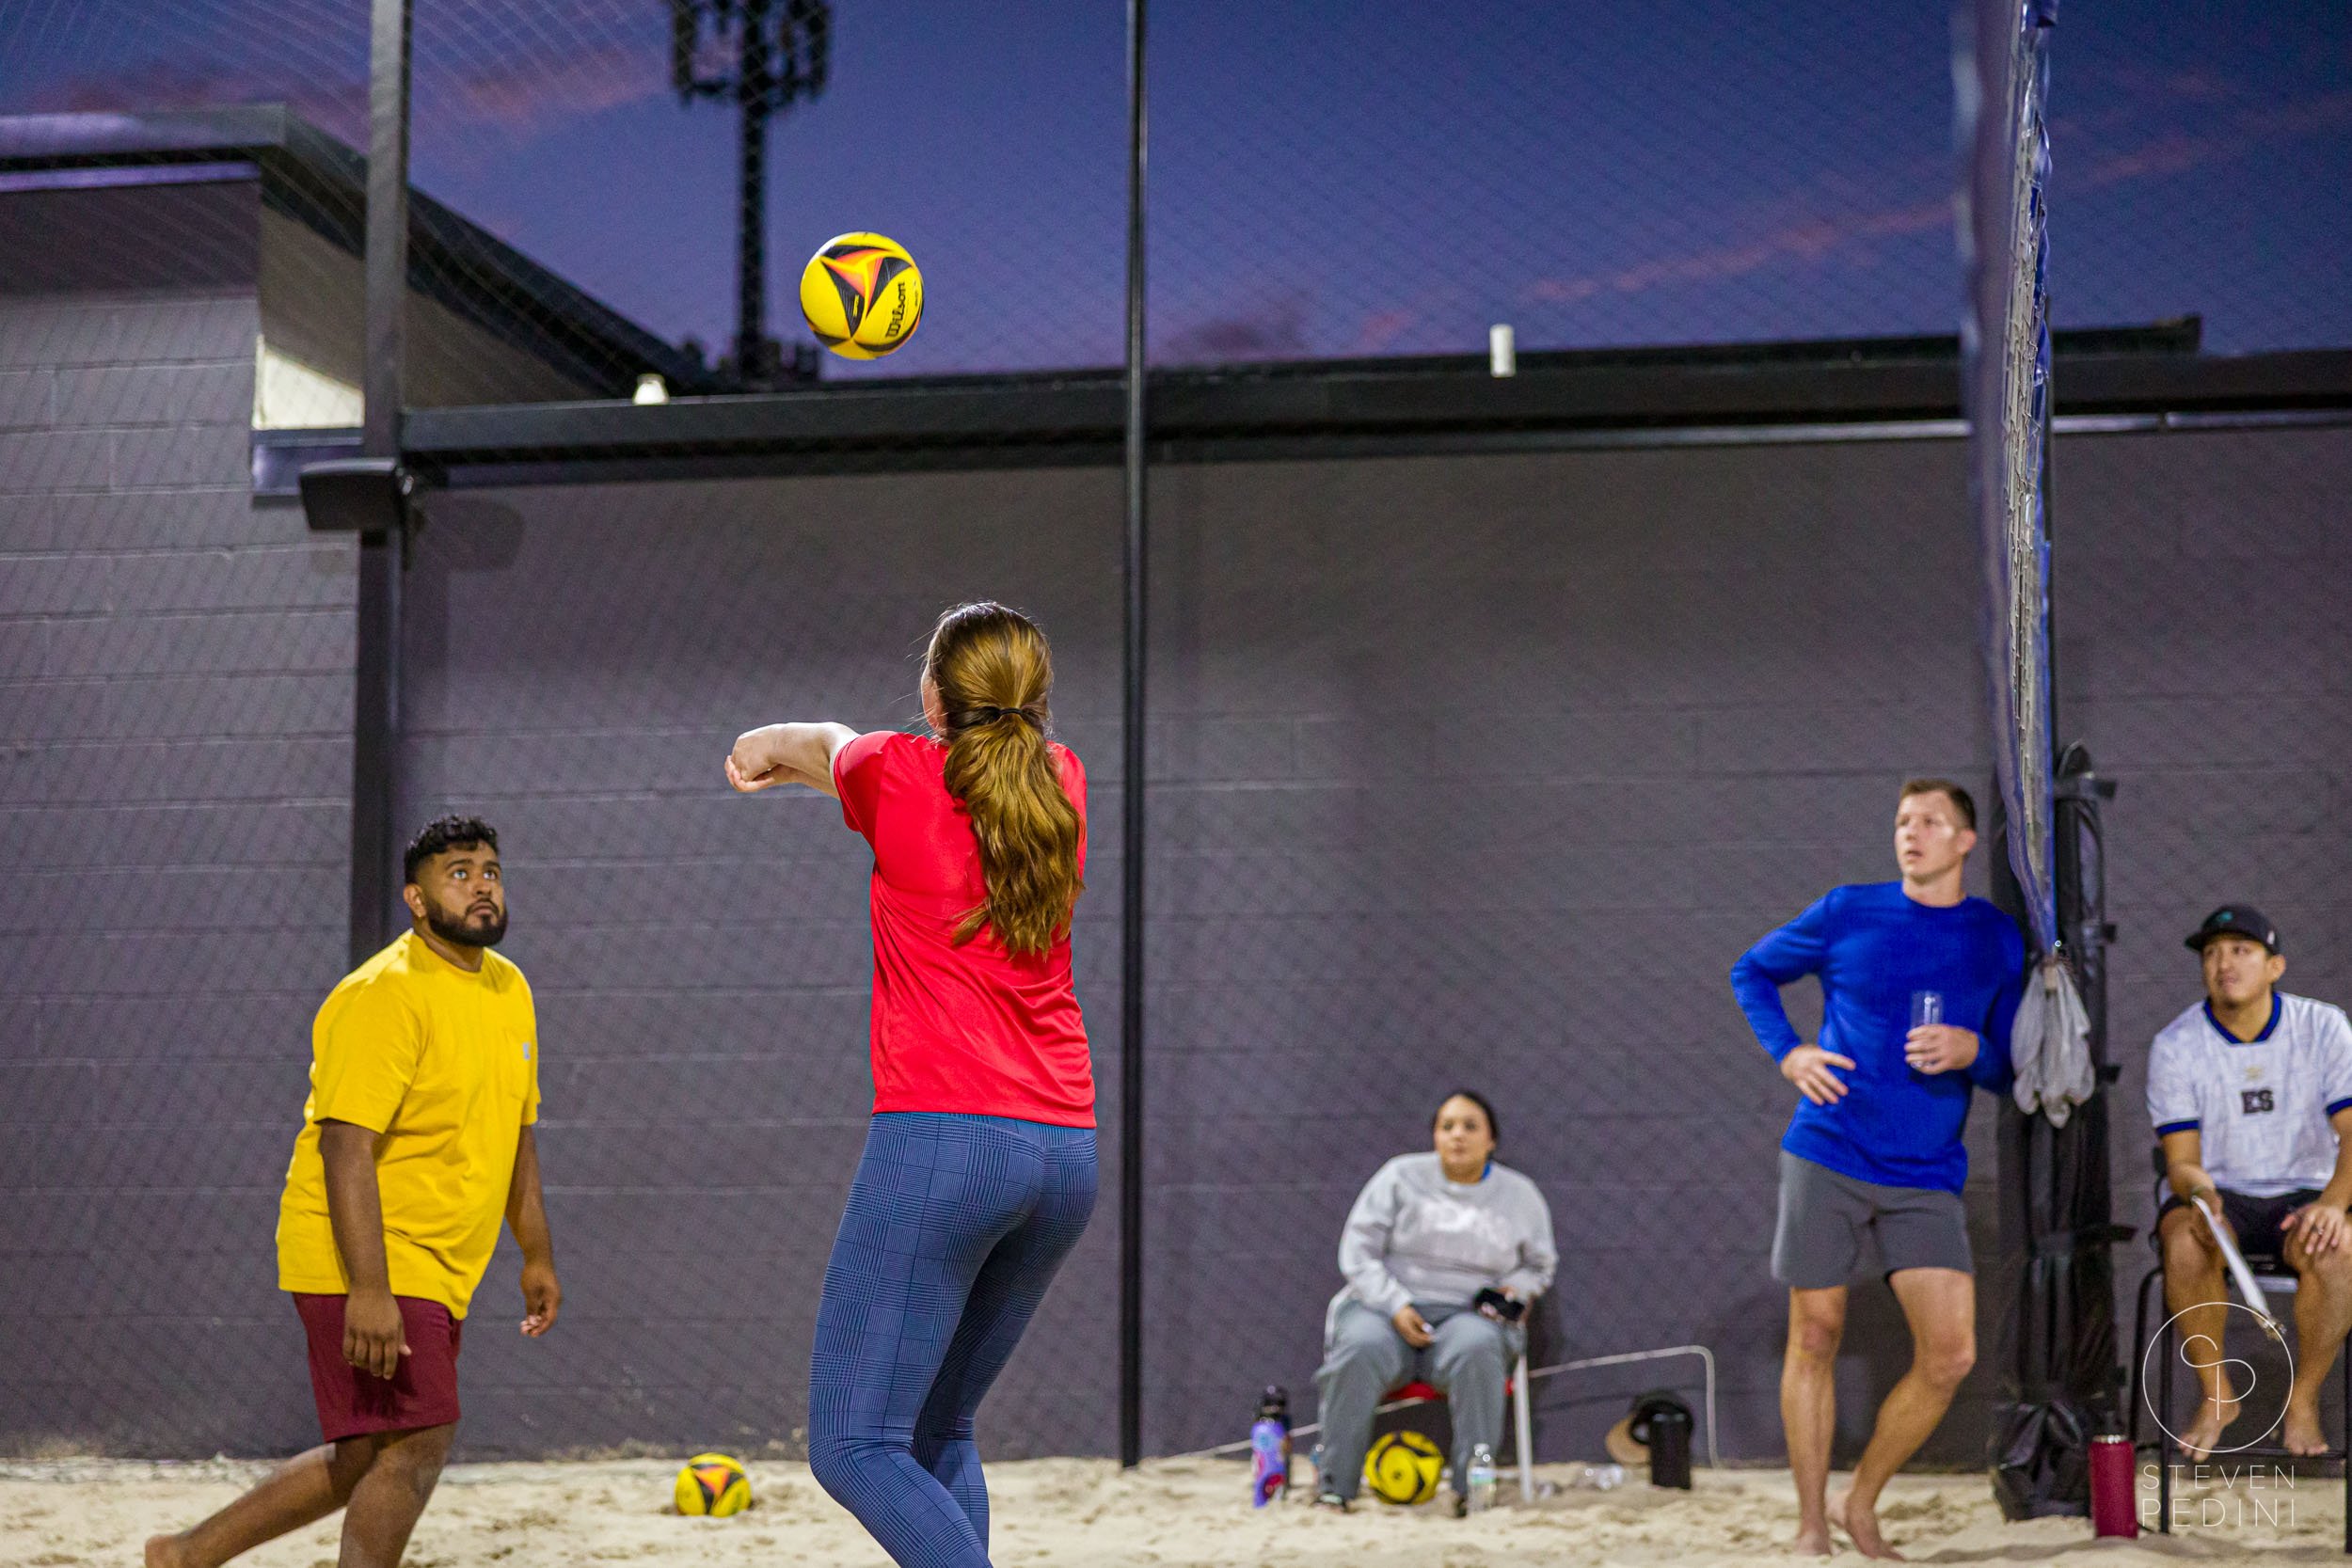 Steven Pedini Photography - Bumpy Pickle - Sand Volleyball - Houston TX - World Cup of Volleyball - 00336.jpg